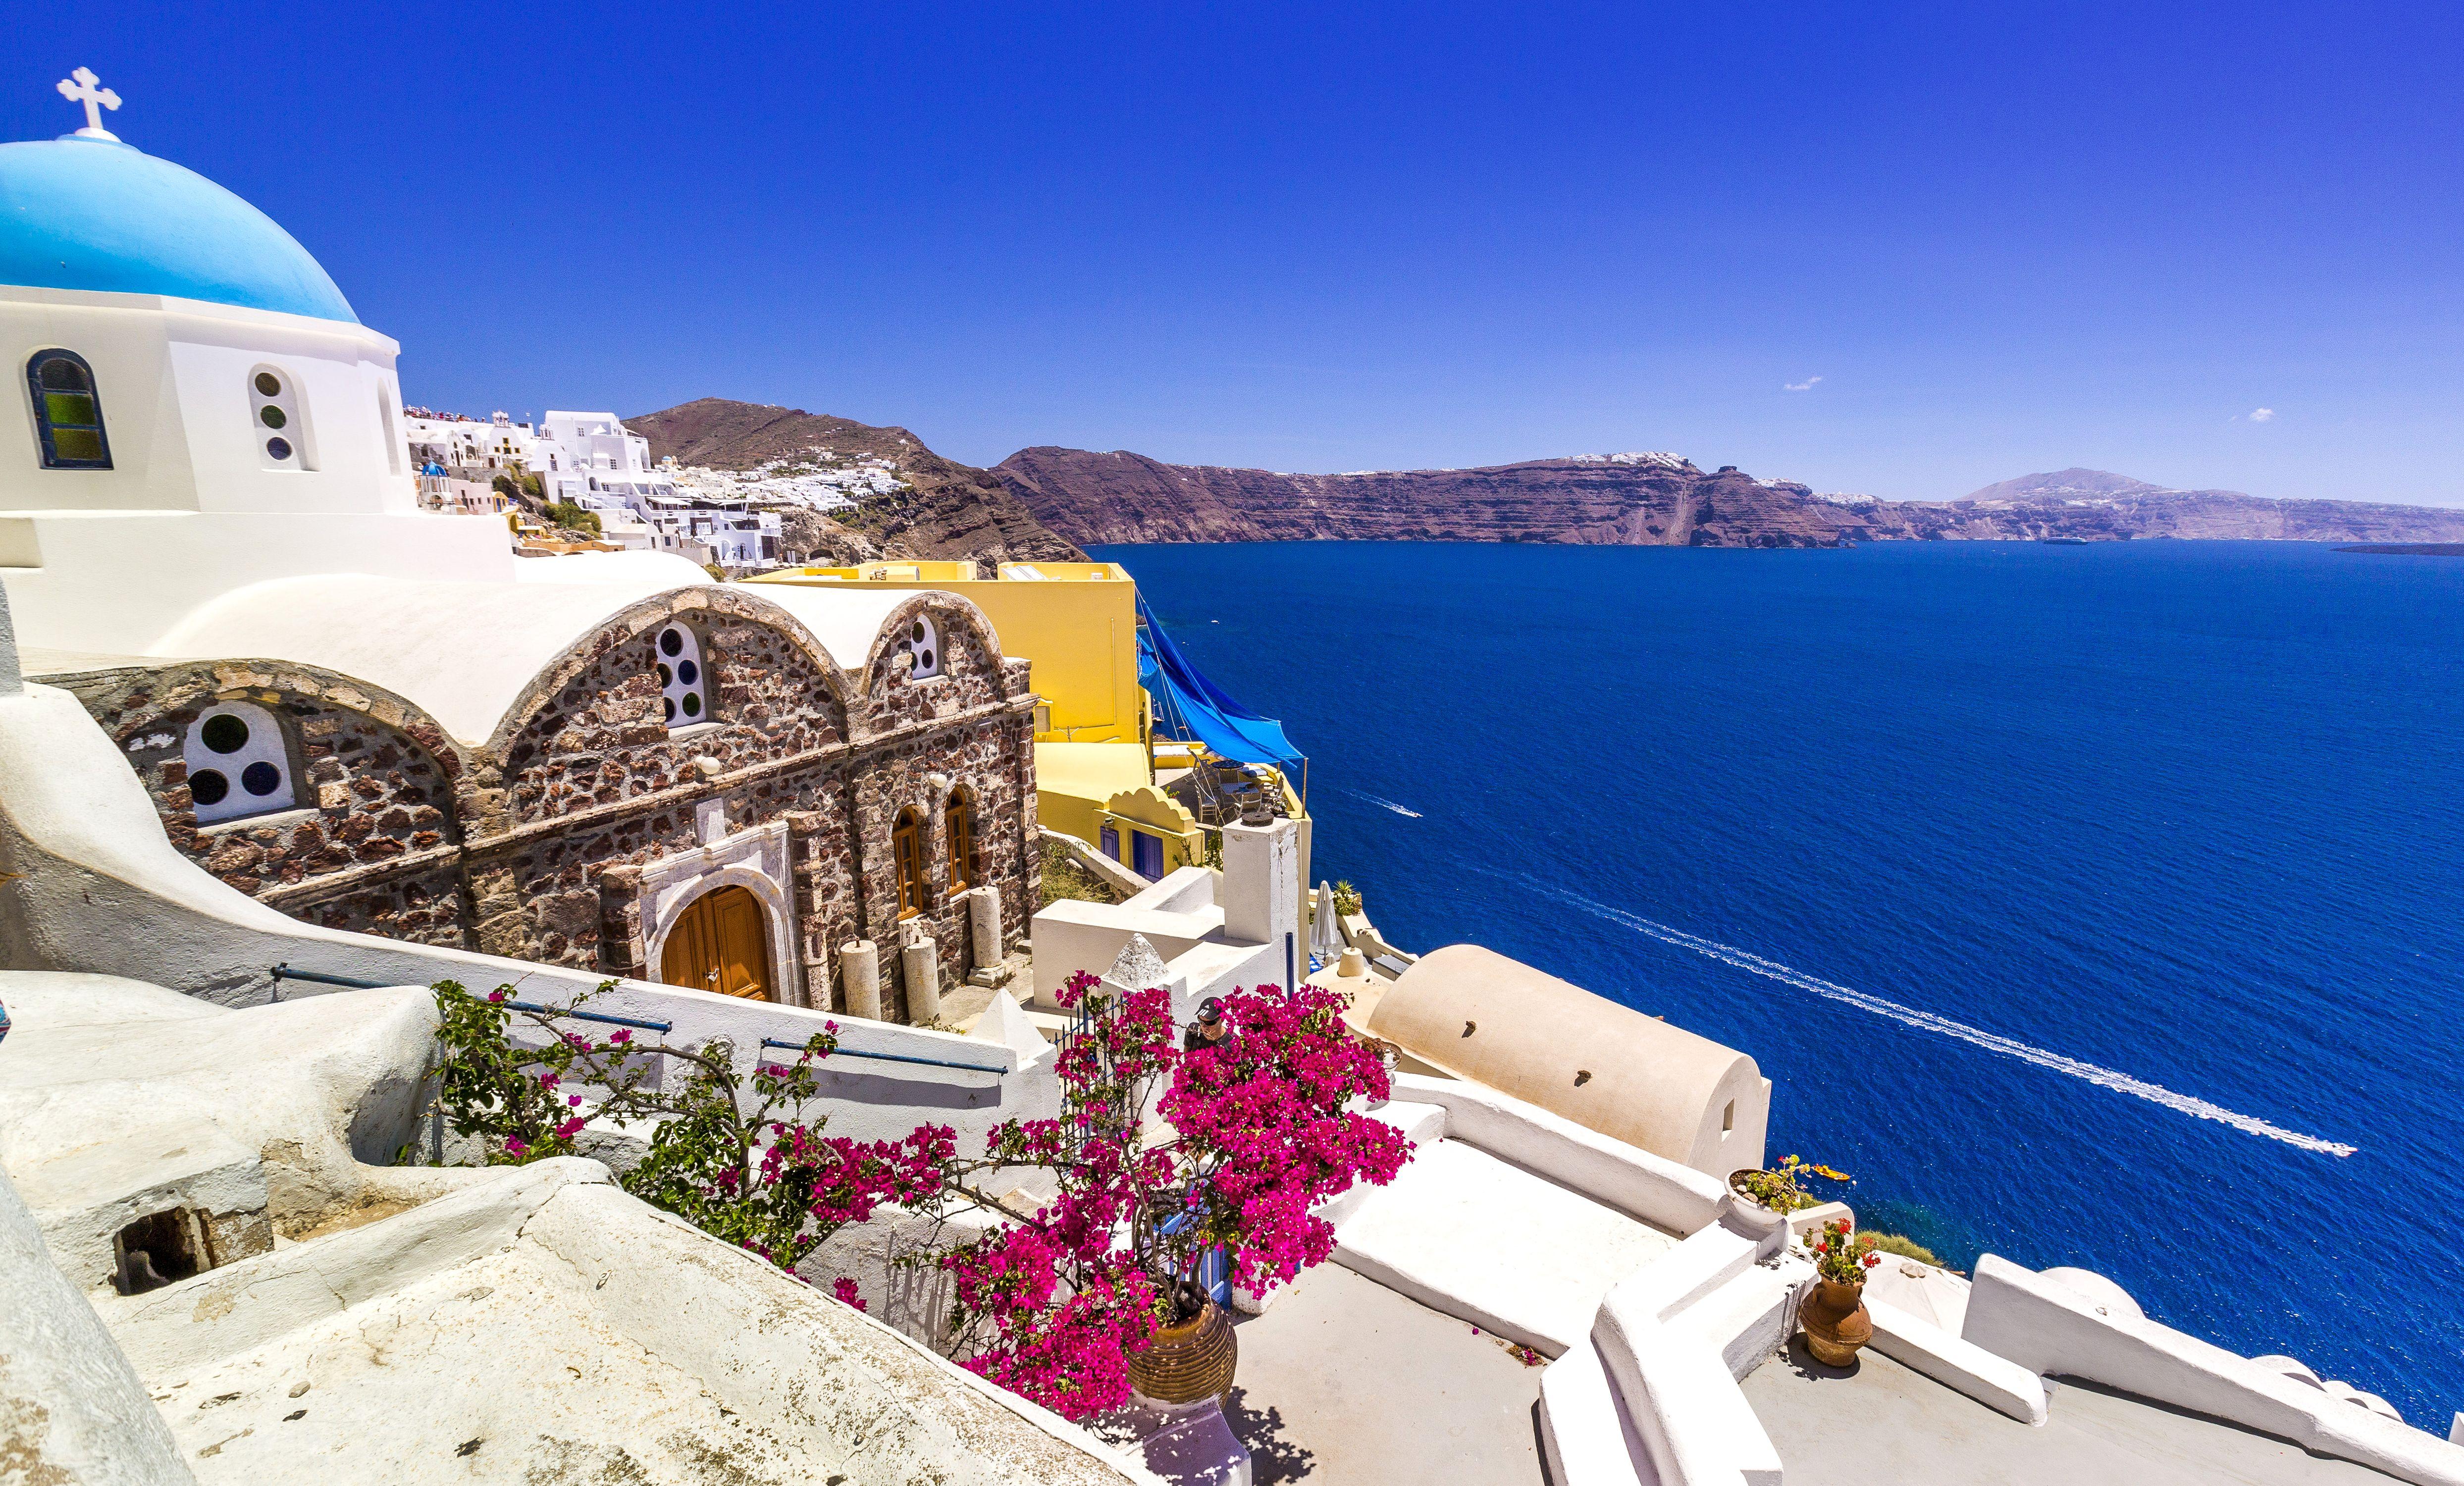 House in Santorini, Greece 4k Ultra HD Wallpaper and Background